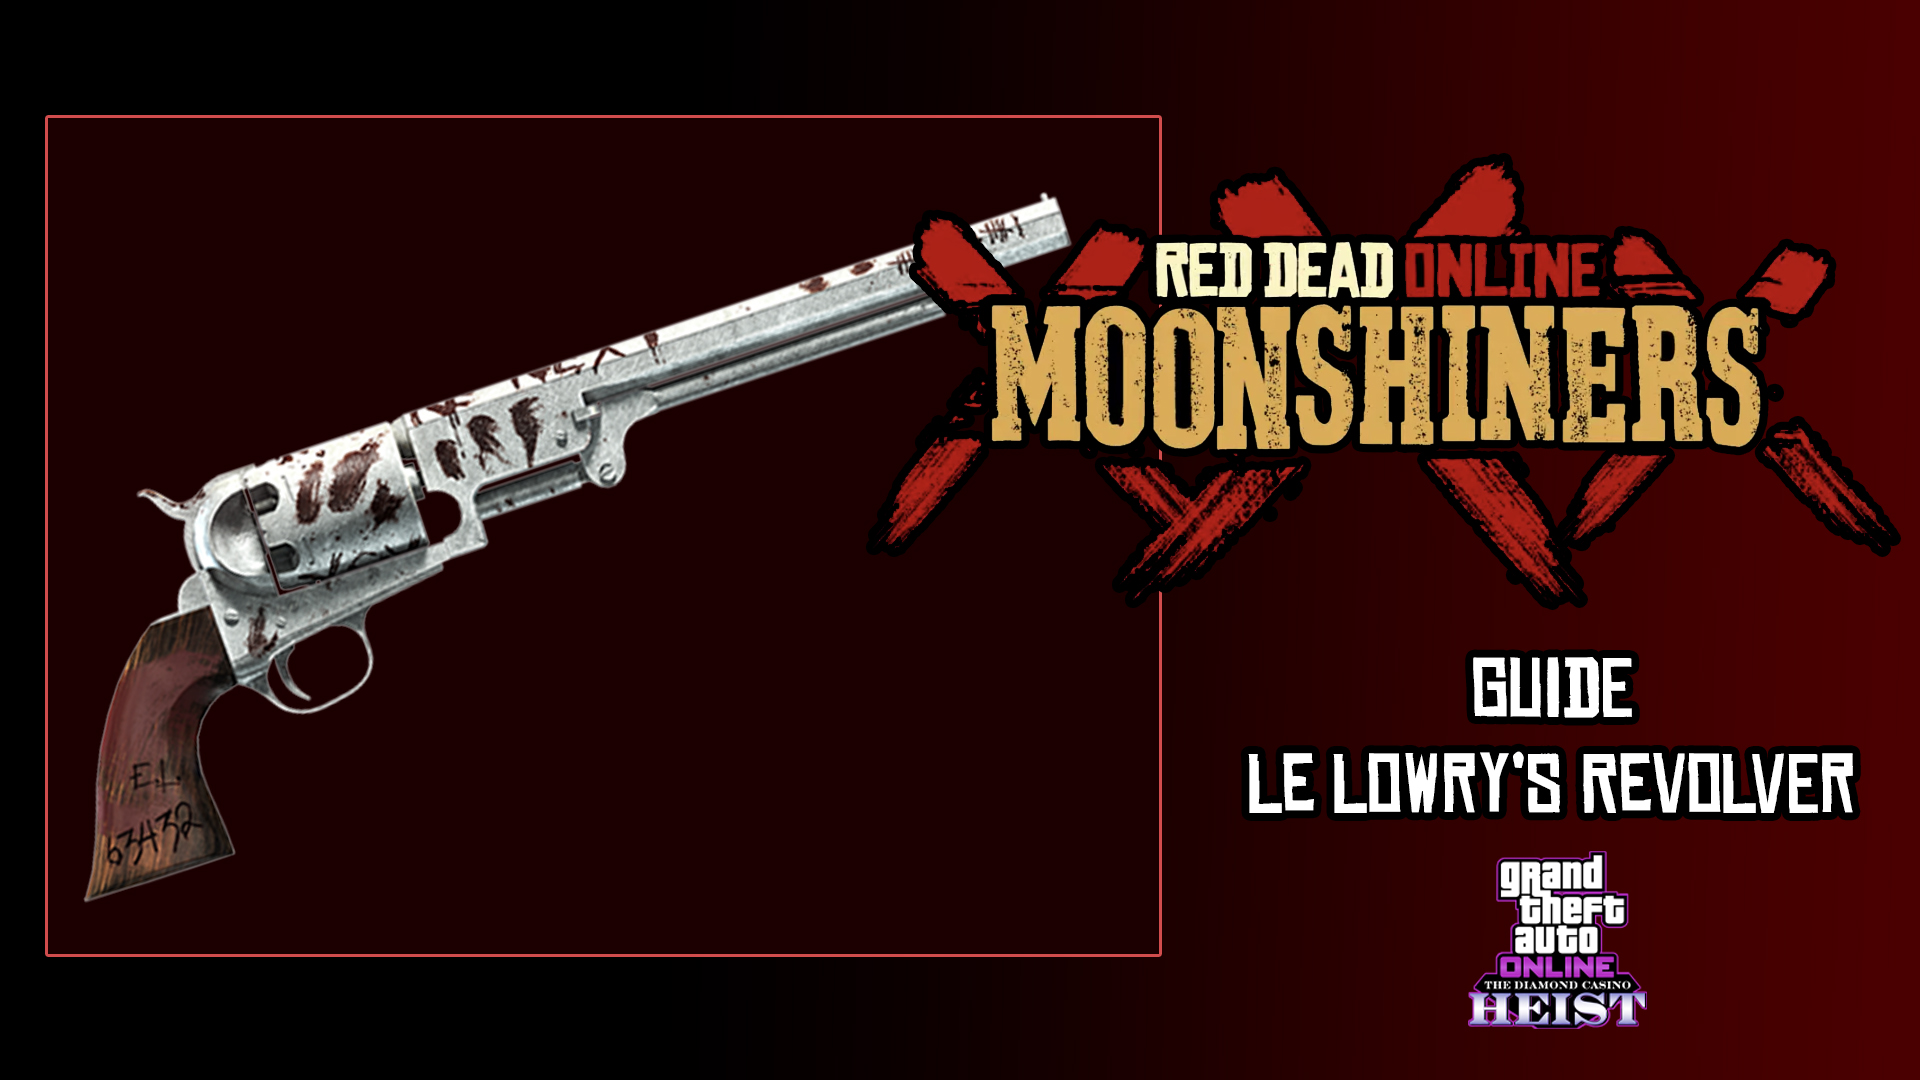 Red Dead Online Guide Lowry's Revolver